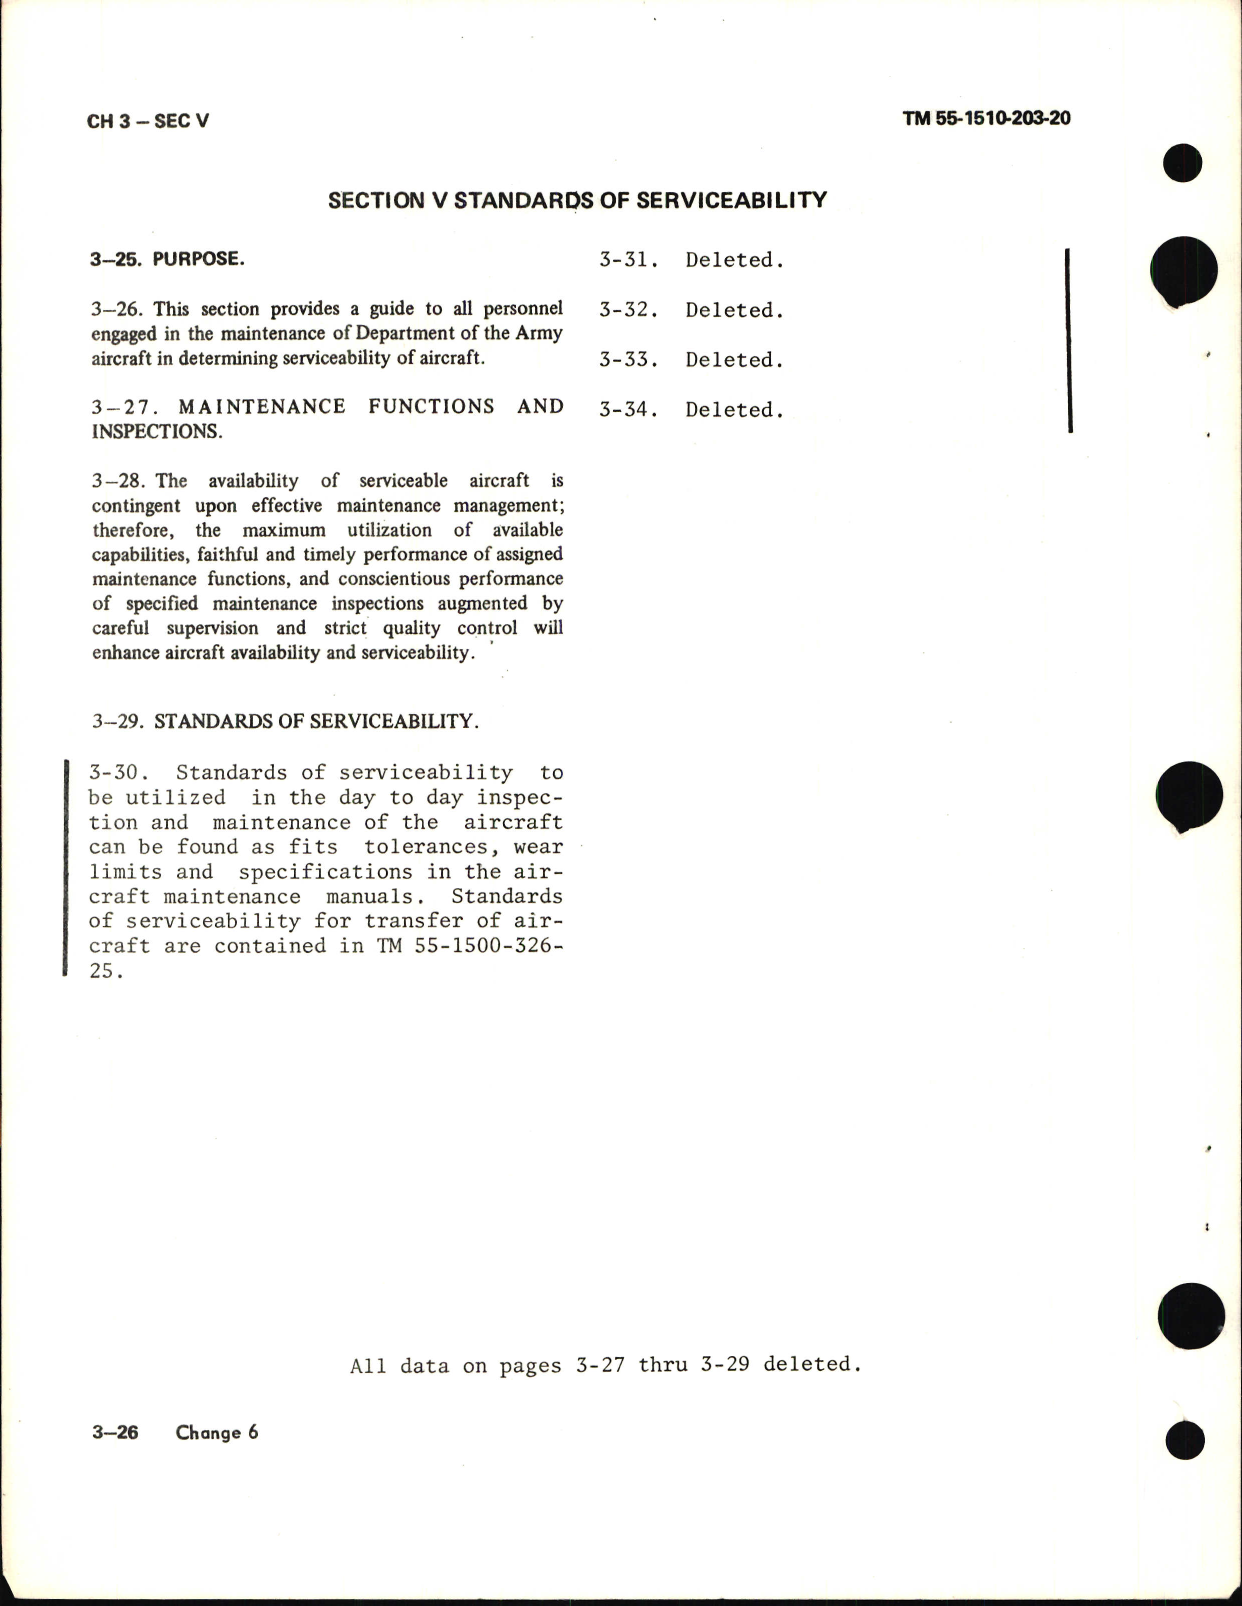 Sample page 6 from AirCorps Library document: Organizational Maintenance Manual for U-6A Aircraft